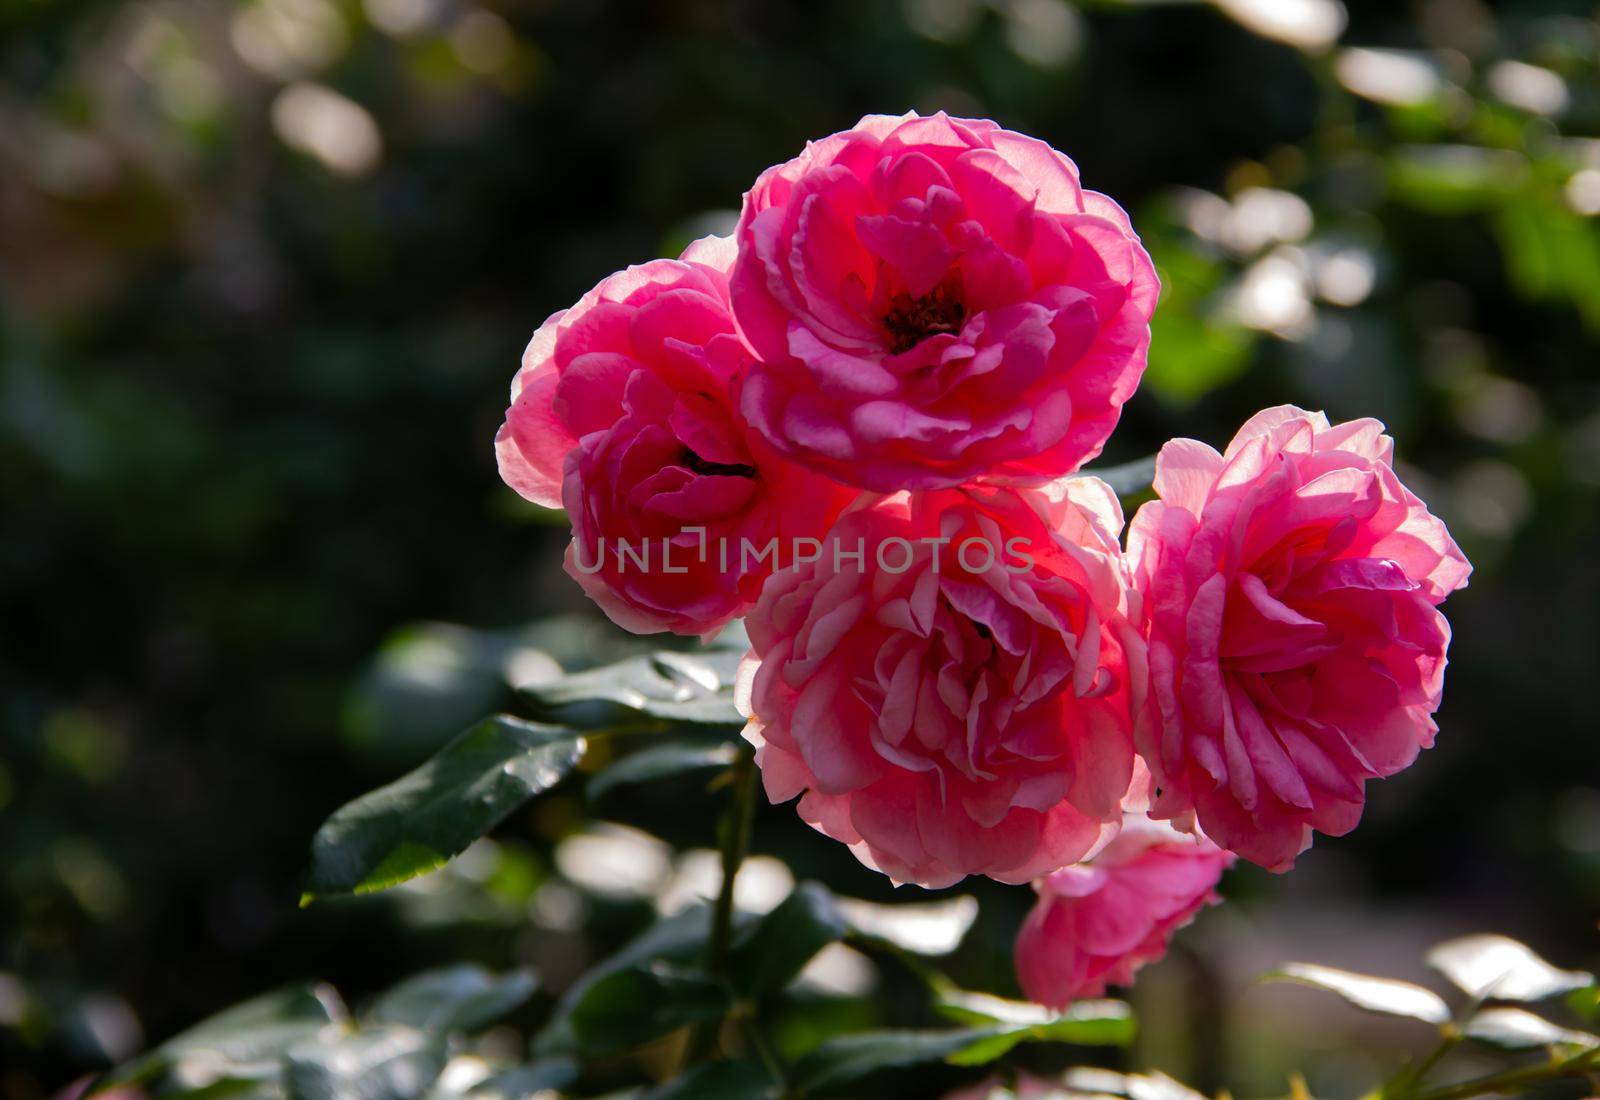 Rose Pink flowers in the garden backgrounds by gallofoto